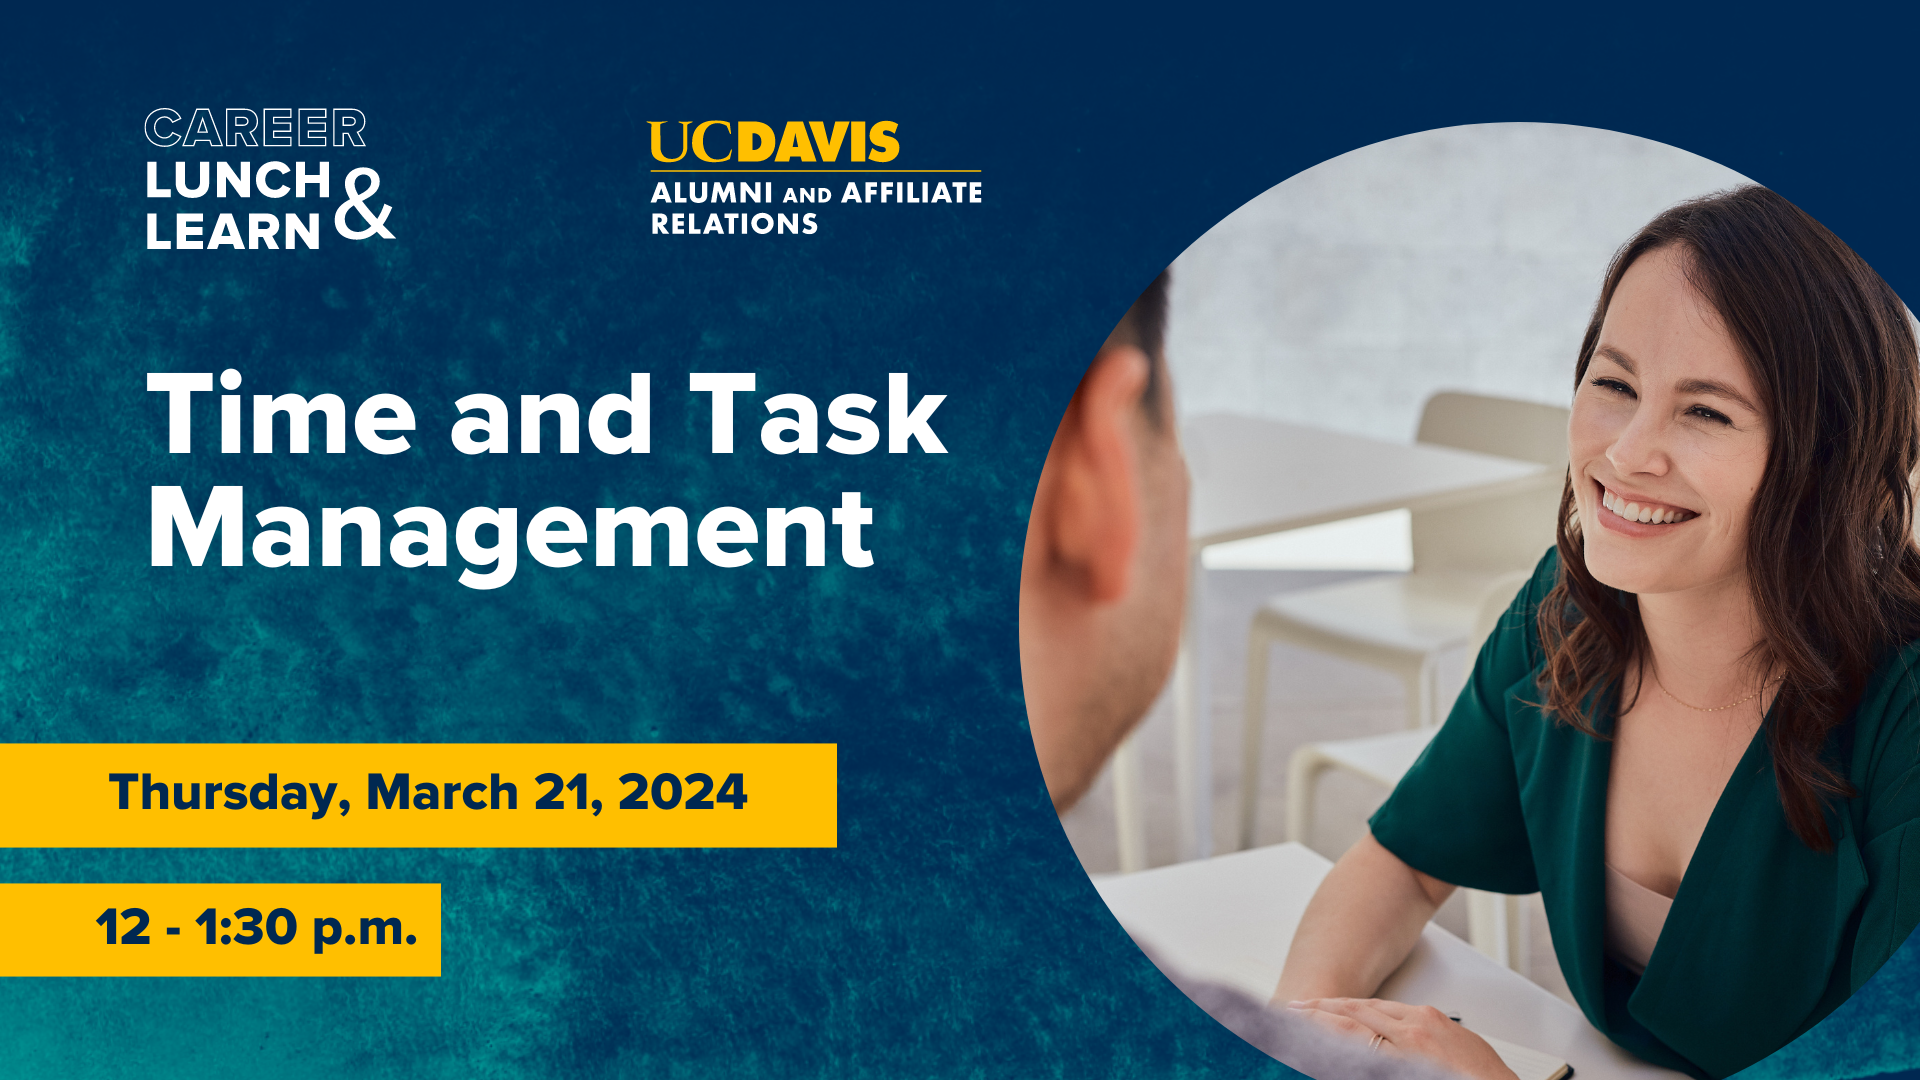 Image of woman coaching client. Text reads: Career Lunch & Learn, UC Davis Alumni and Affiliate Relations, Time and Task Management, Thursday, March 21, 2024, 12-1:30 PM